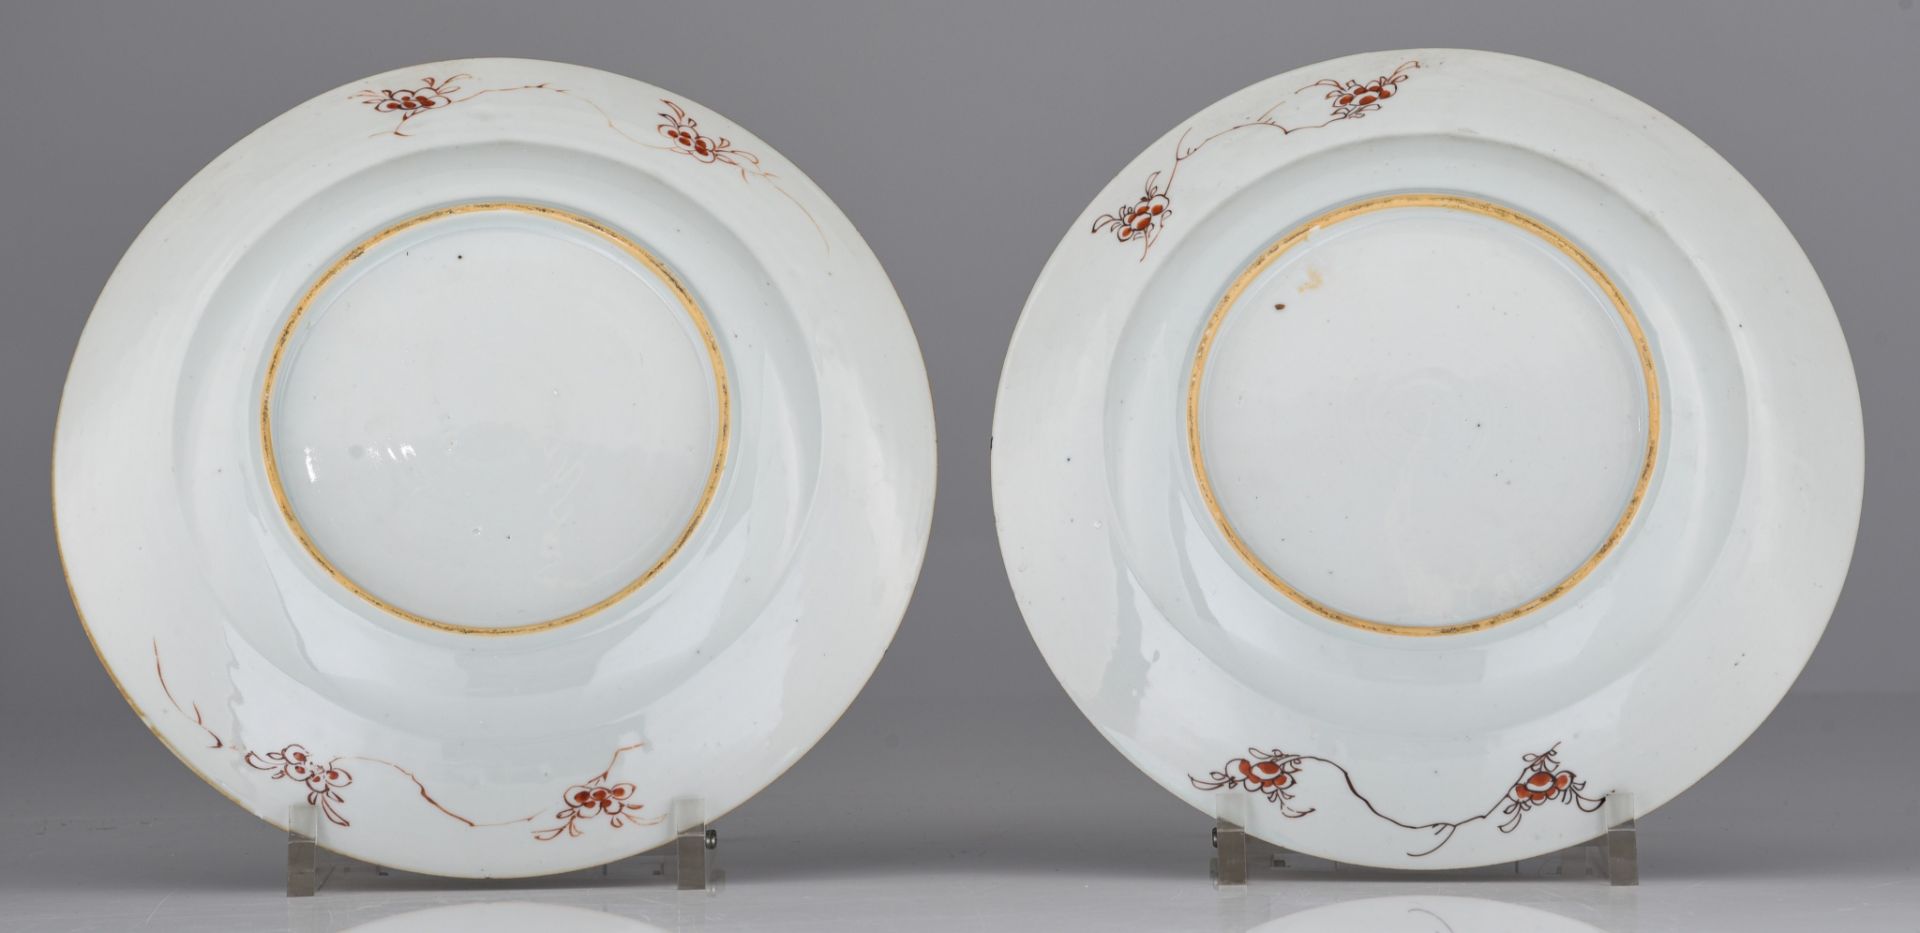 (BIDDING ONLY ON CARLOBONTE.BE) A collection of fine Chinese Imari figural export porcelain plates, - Image 4 of 10